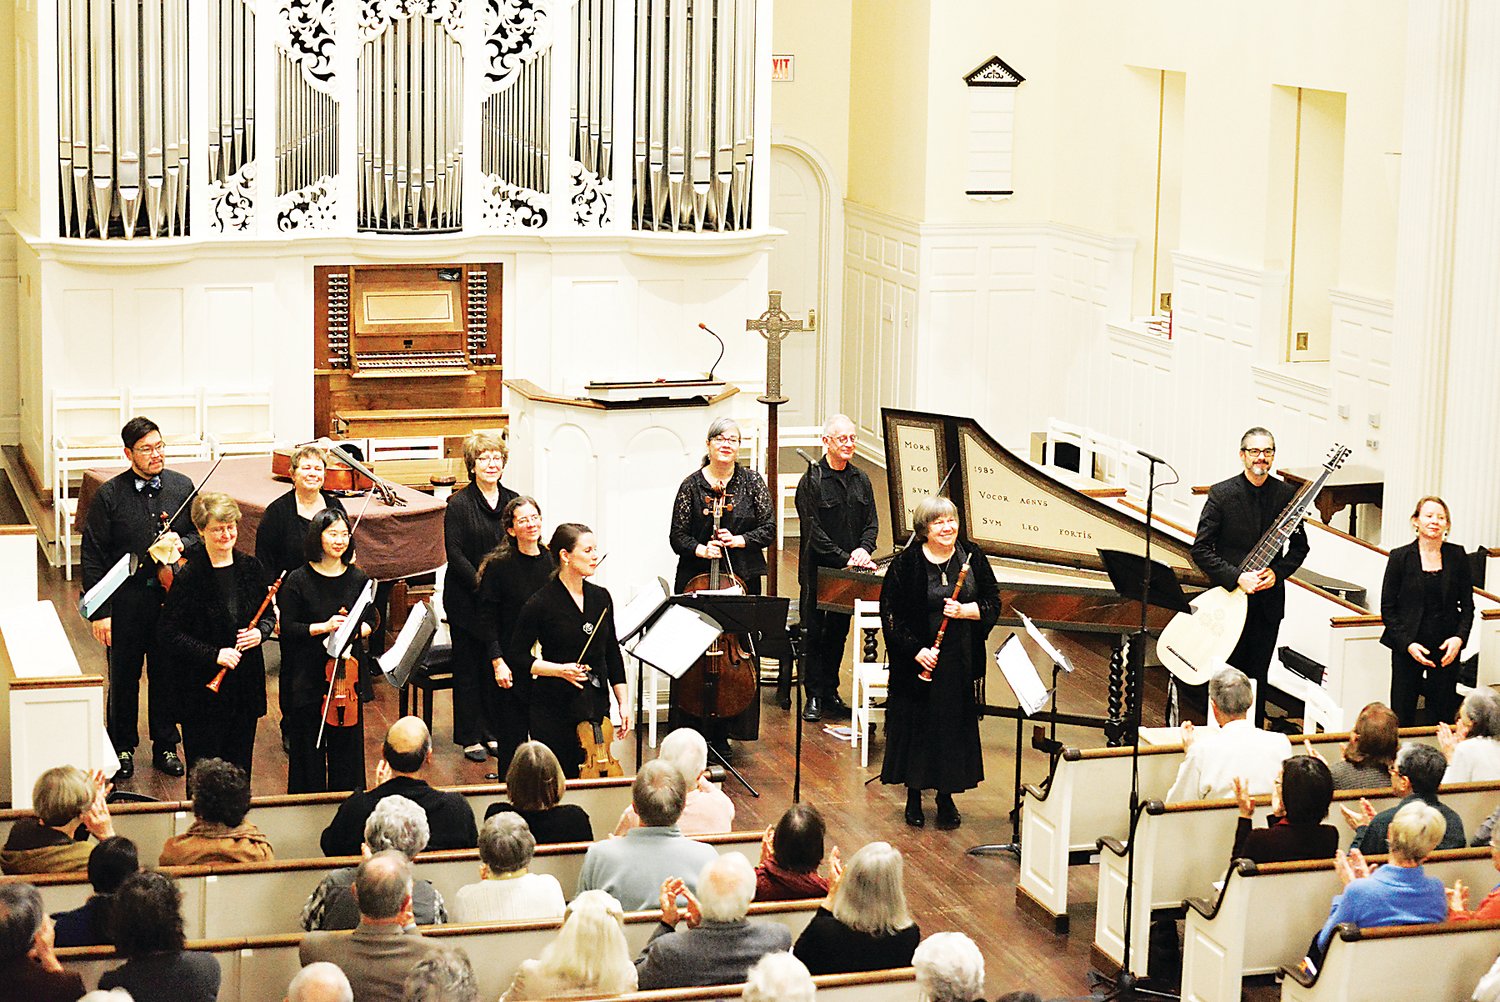 Dryden Ensemble, shown at the conclusion of a prior concert, celebrates its 25th season this year.